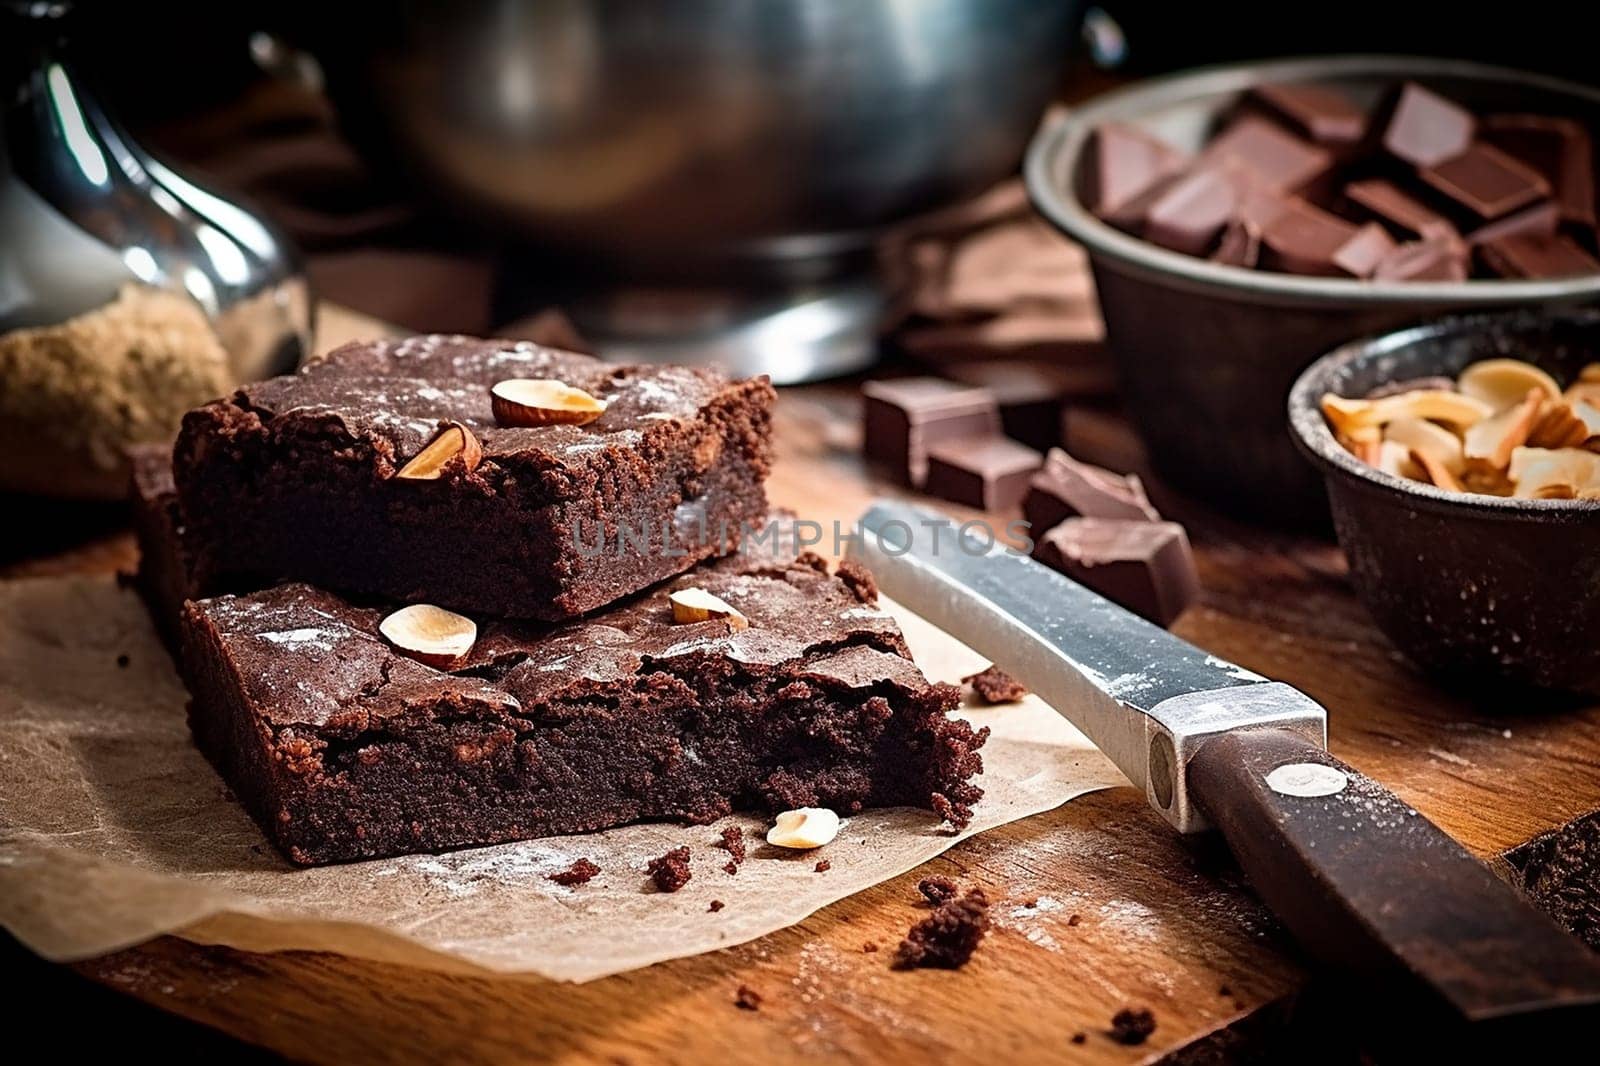 Moist chocolate brownies with nuts on a wooden surface, rustic kitchen setting.